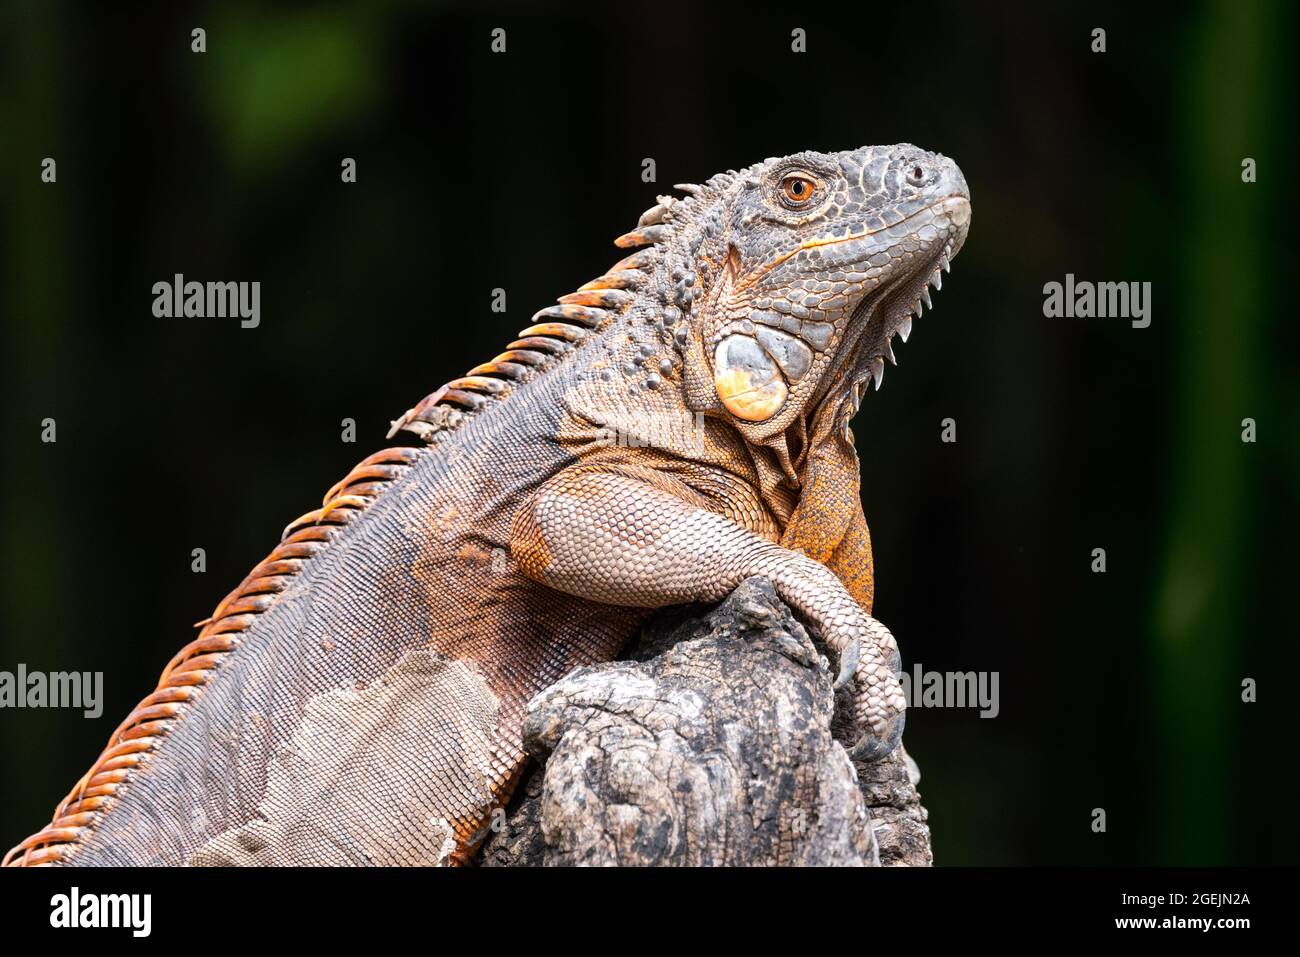 Profile close up portrait of a green iguana with orange hide standing on a rock Stock Photo